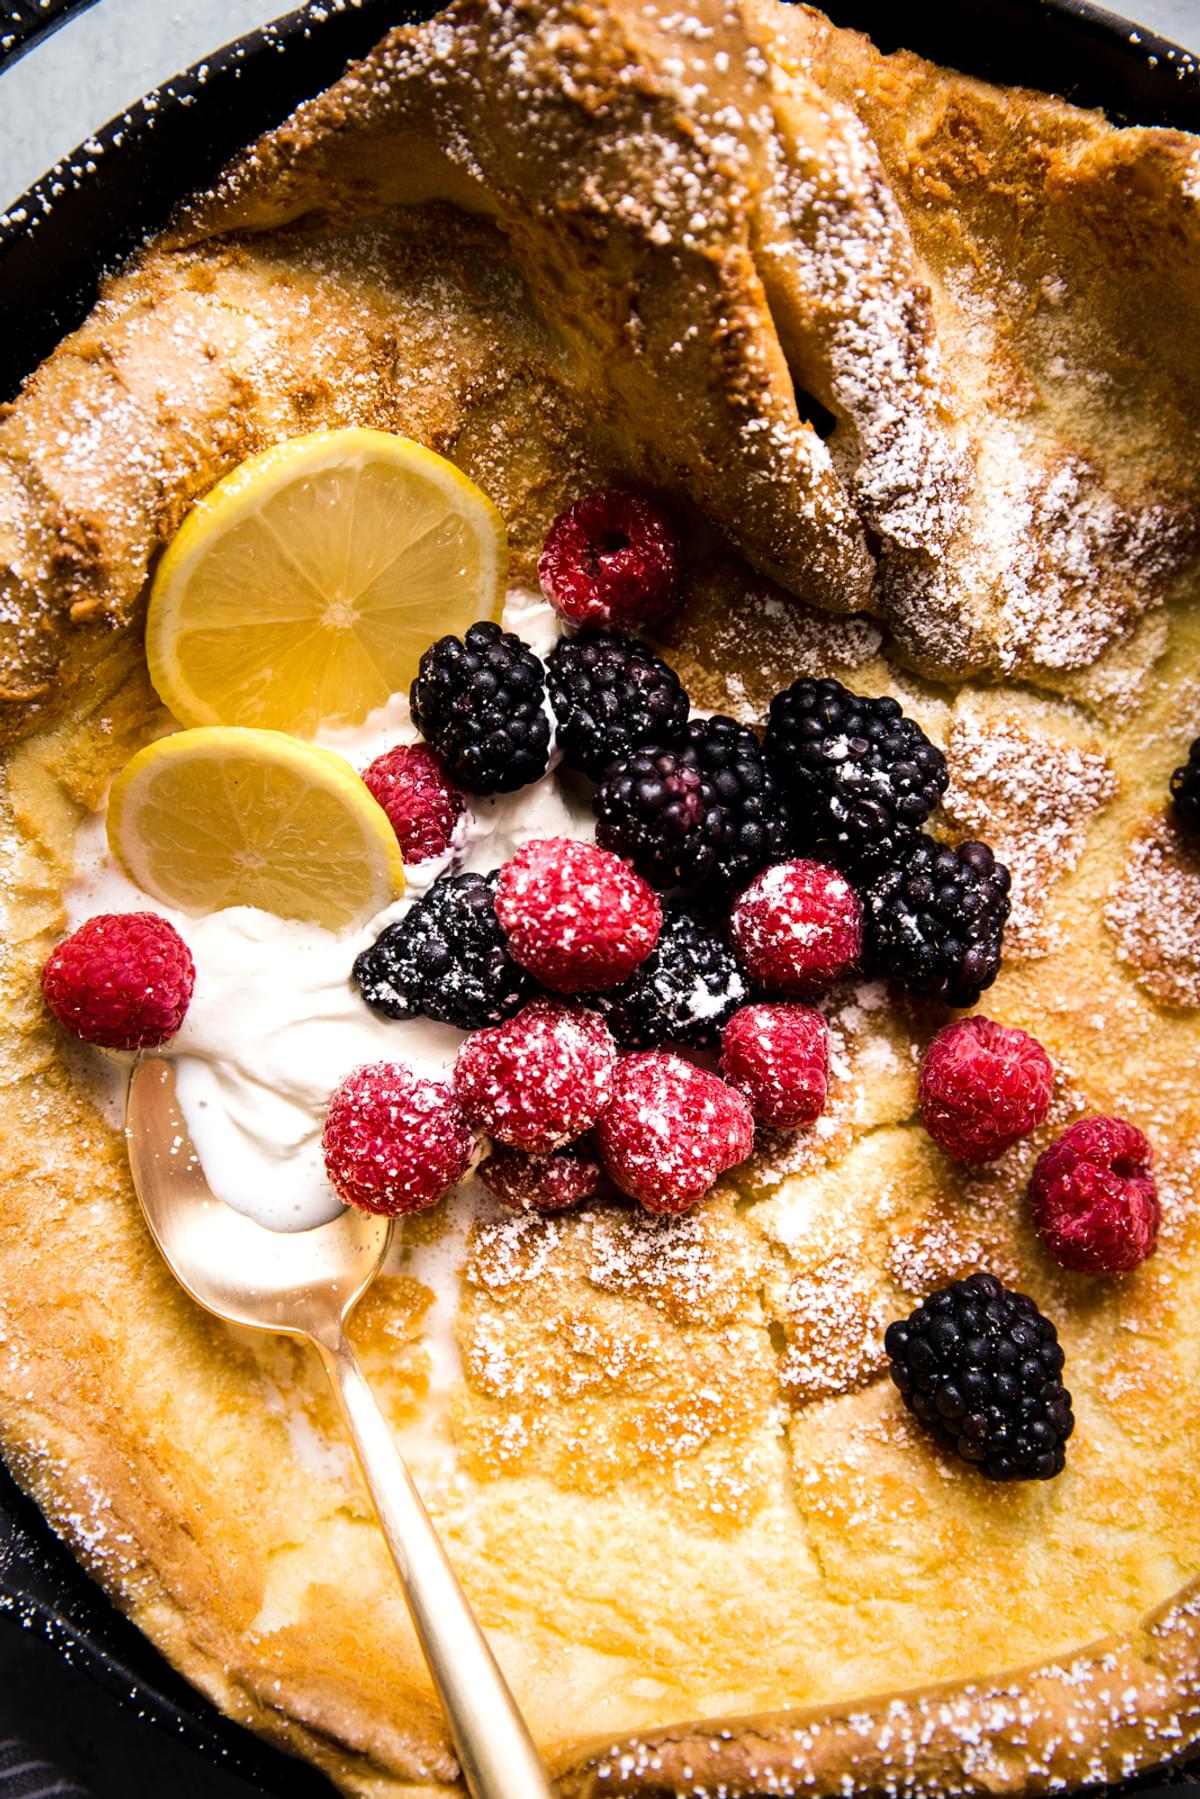 Homemade Dutch baby pancake in a cast iron skillet topped with whipped cream, powdered sugar, berries and lemon